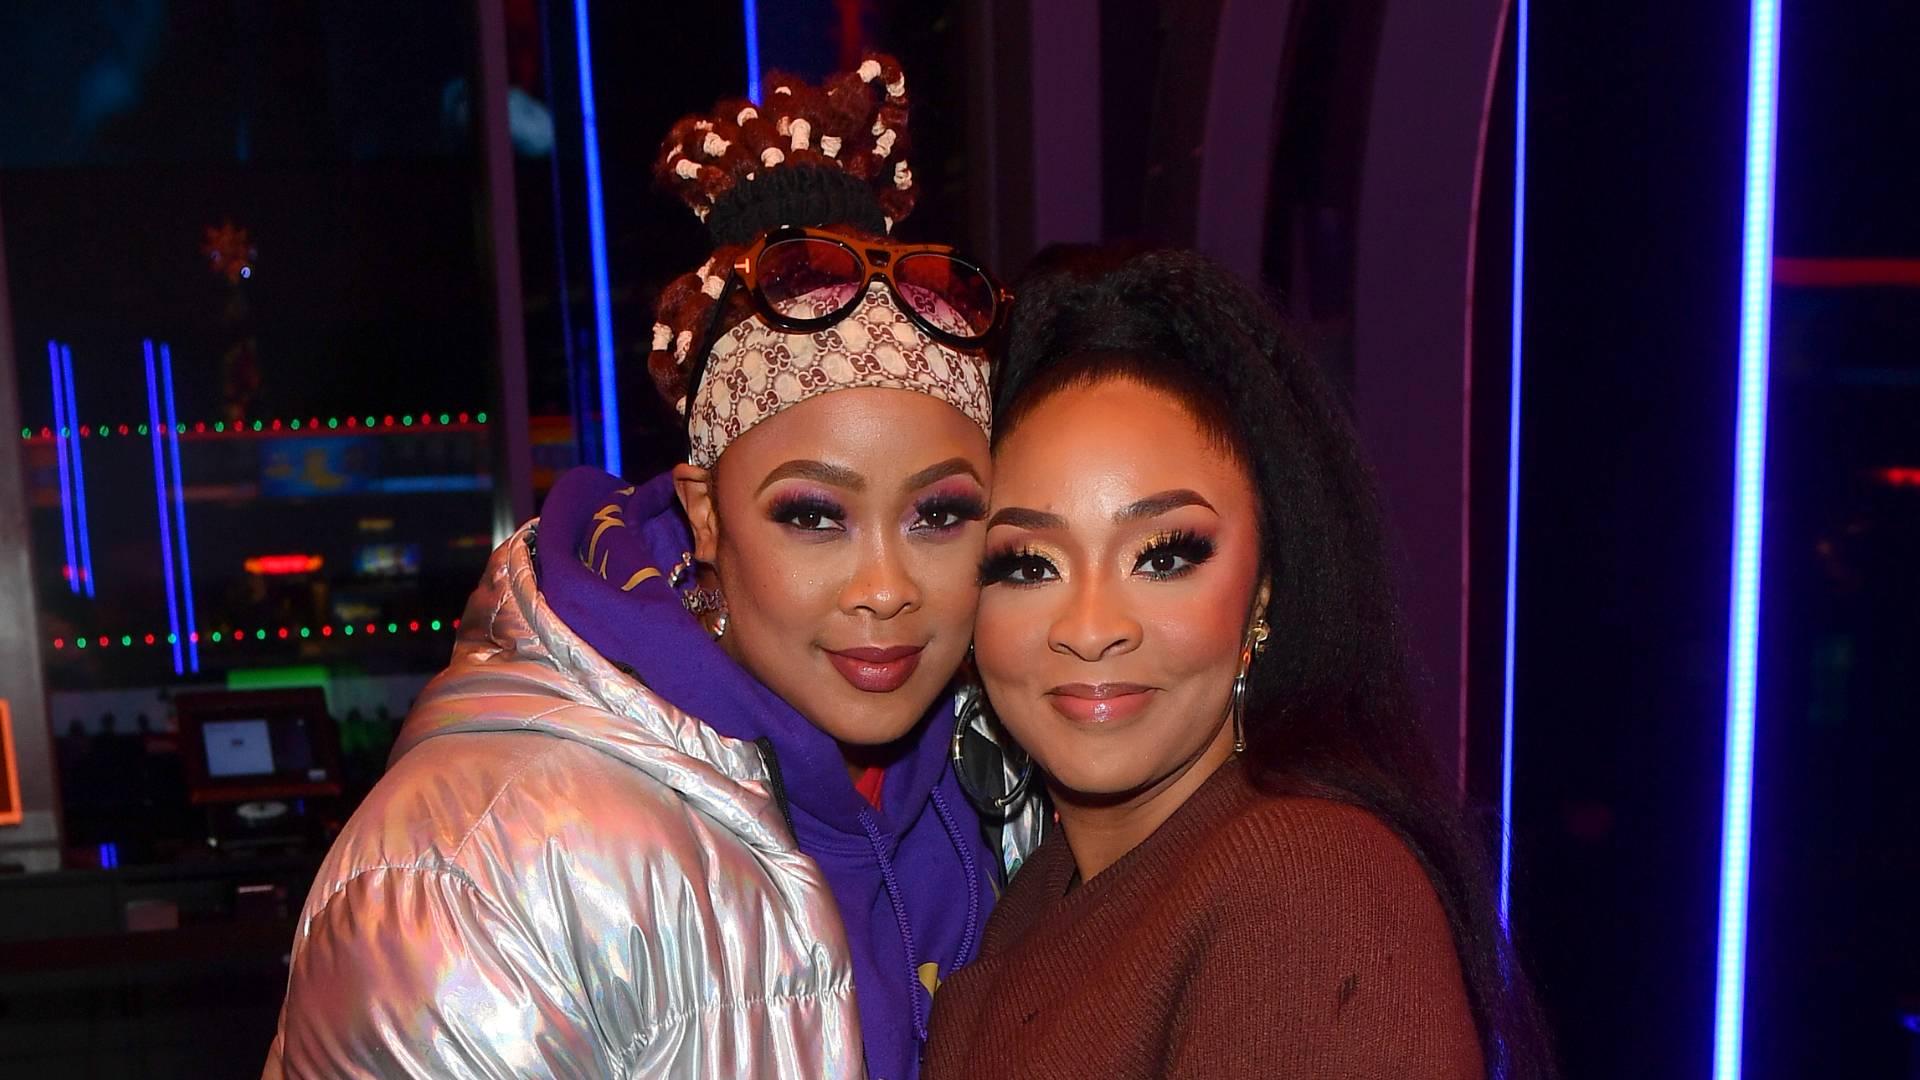 DaBrat and Jesseca Dupart attend the Atlanta screening of "I Wanna Dance With Somebody" at Regal Atlantic Station on December 14, 2022 in Atlanta, Georgia. 